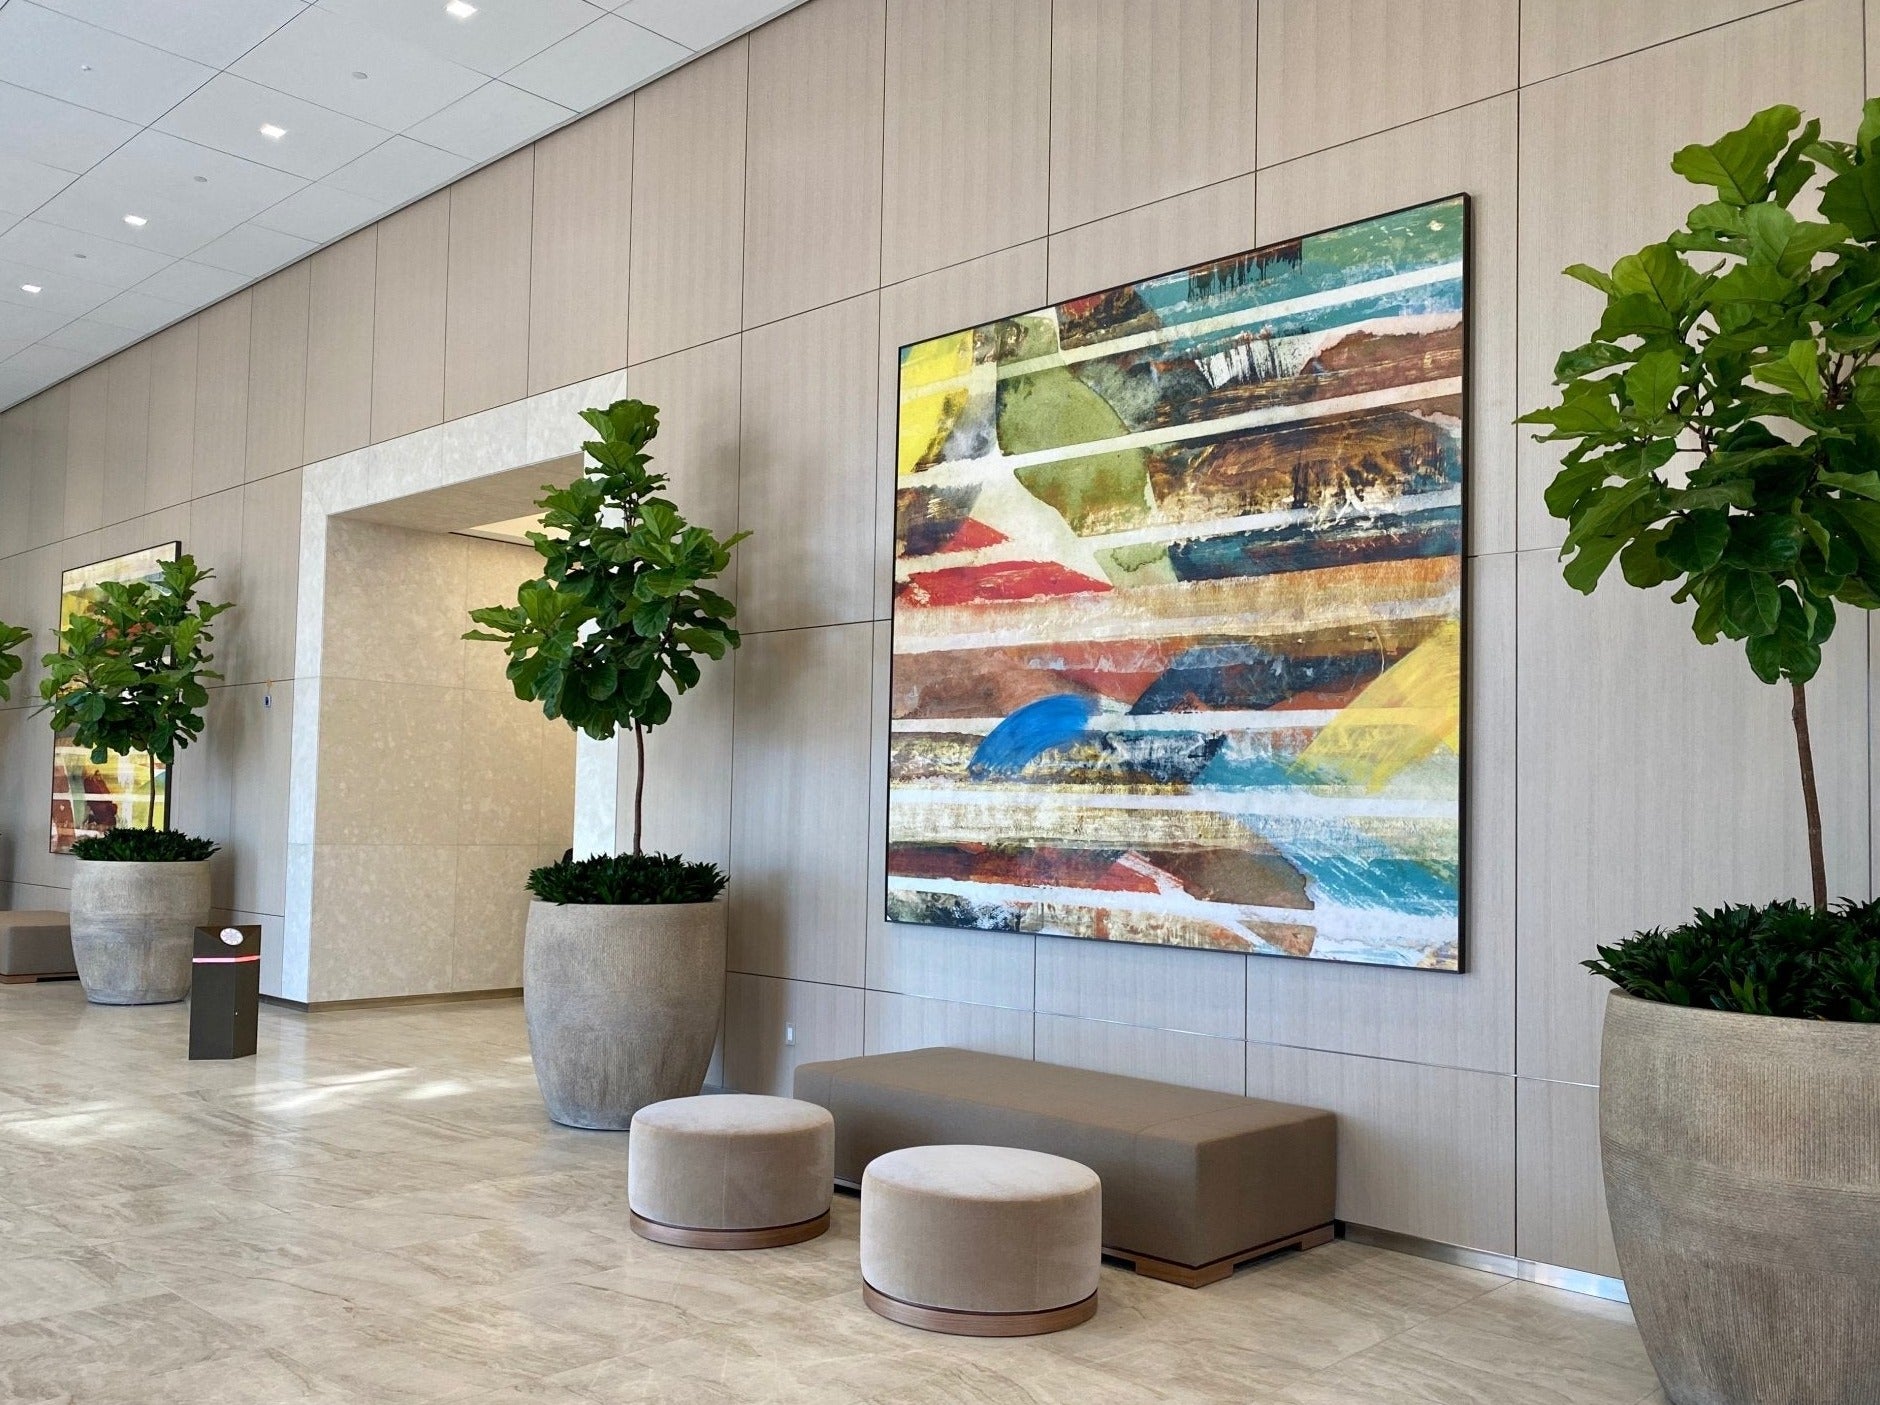 A modern lobby at Fox Plaza featuring artwork by Wrapped Studio, with a large abstract painting in vibrant stripes of red, blue, yellow, and other colors dominating the wall.